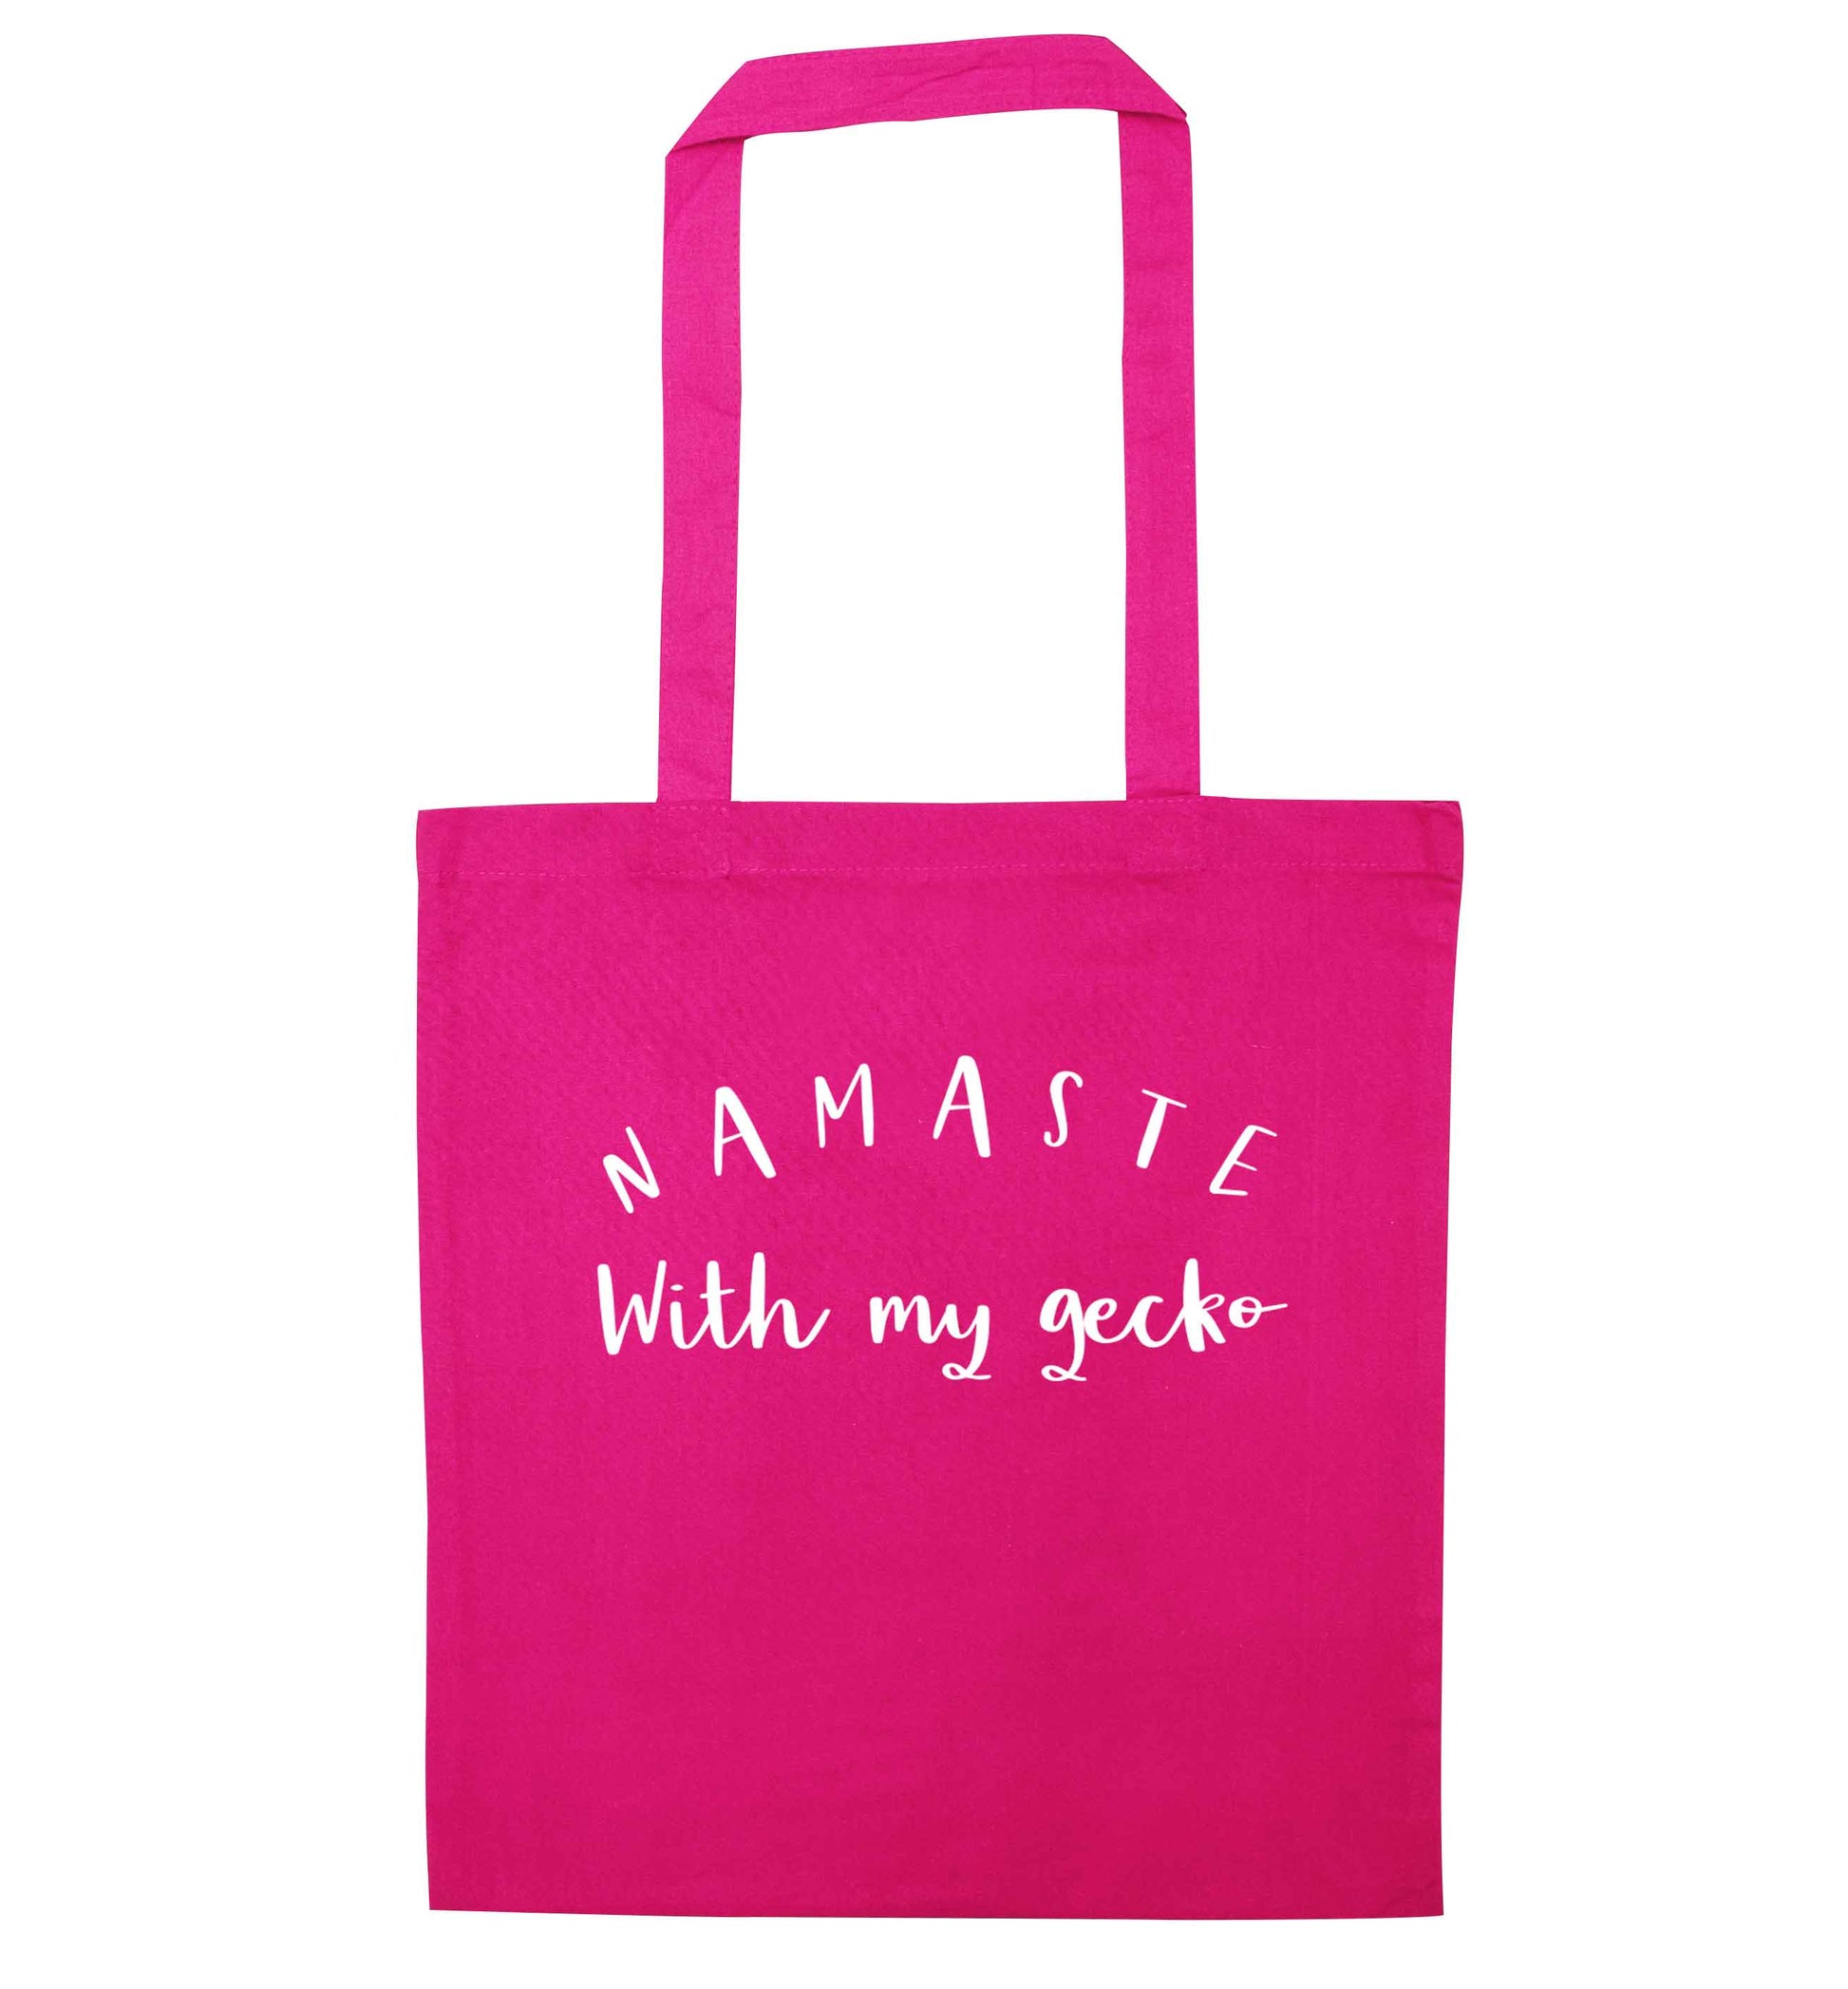 Namaste with my gecko pink tote bag